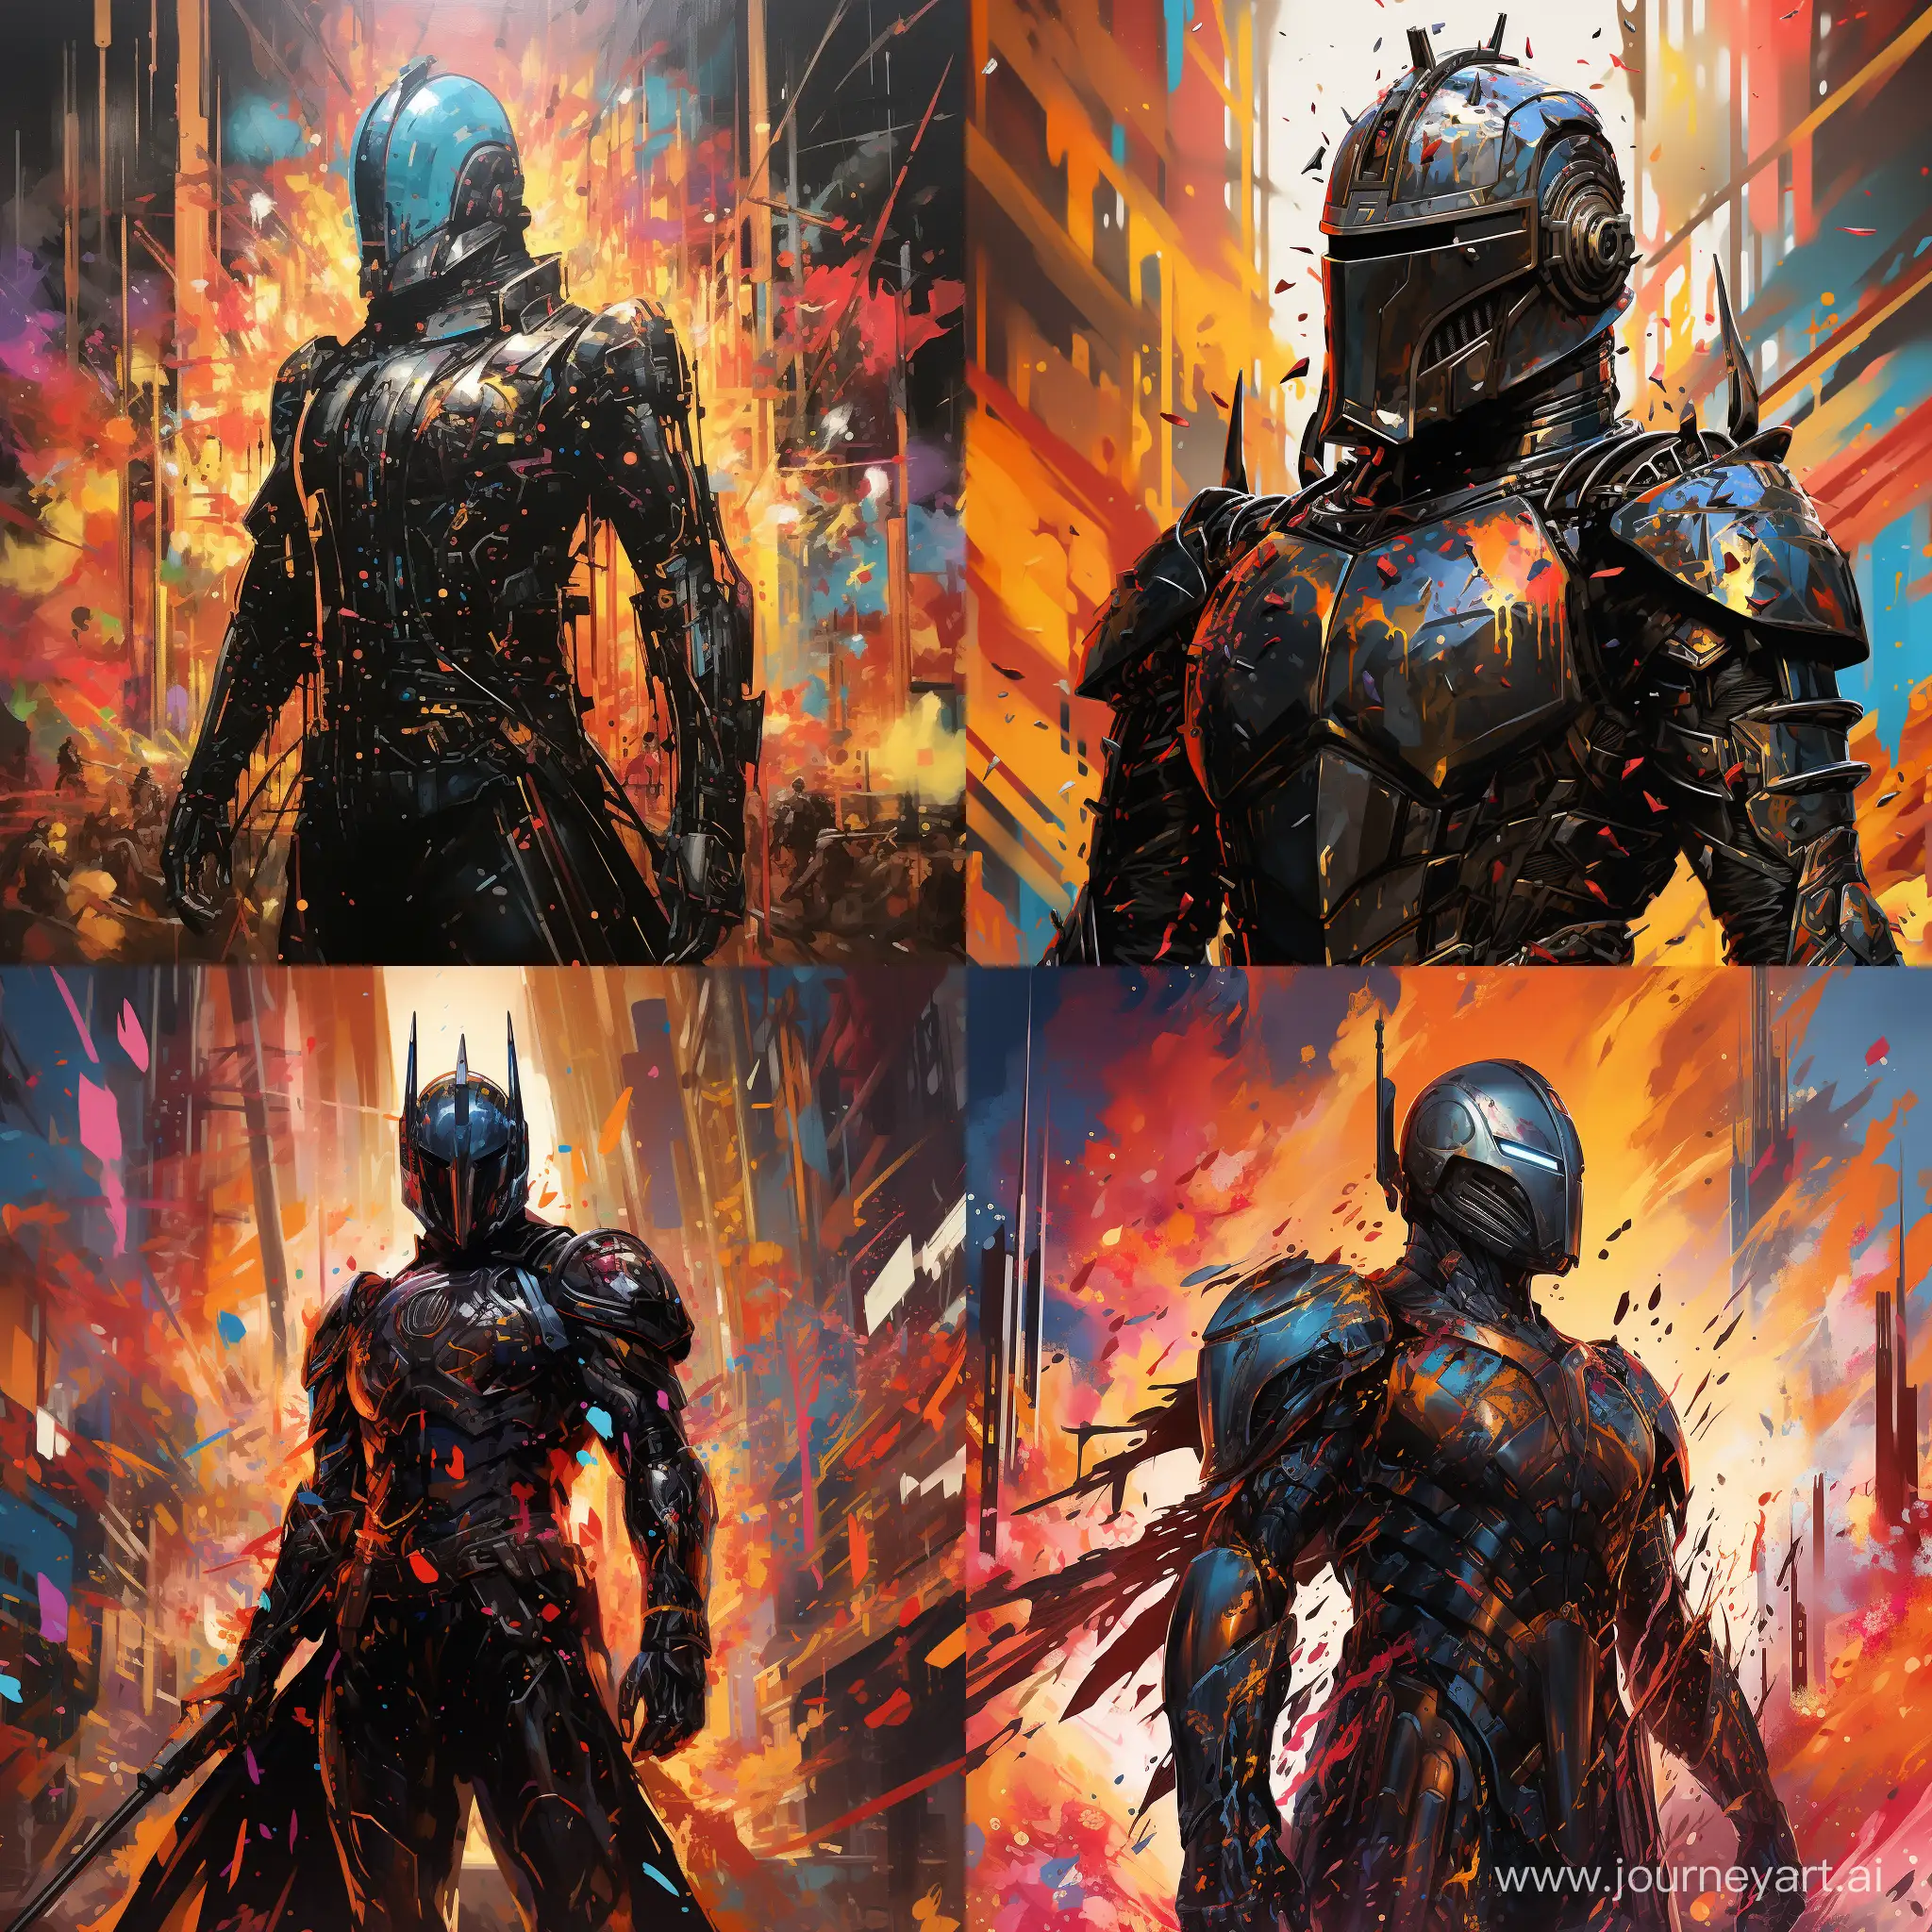 Cyberpunk-Black-Knight-Stands-Tall-in-Explosive-Color-Abstraction